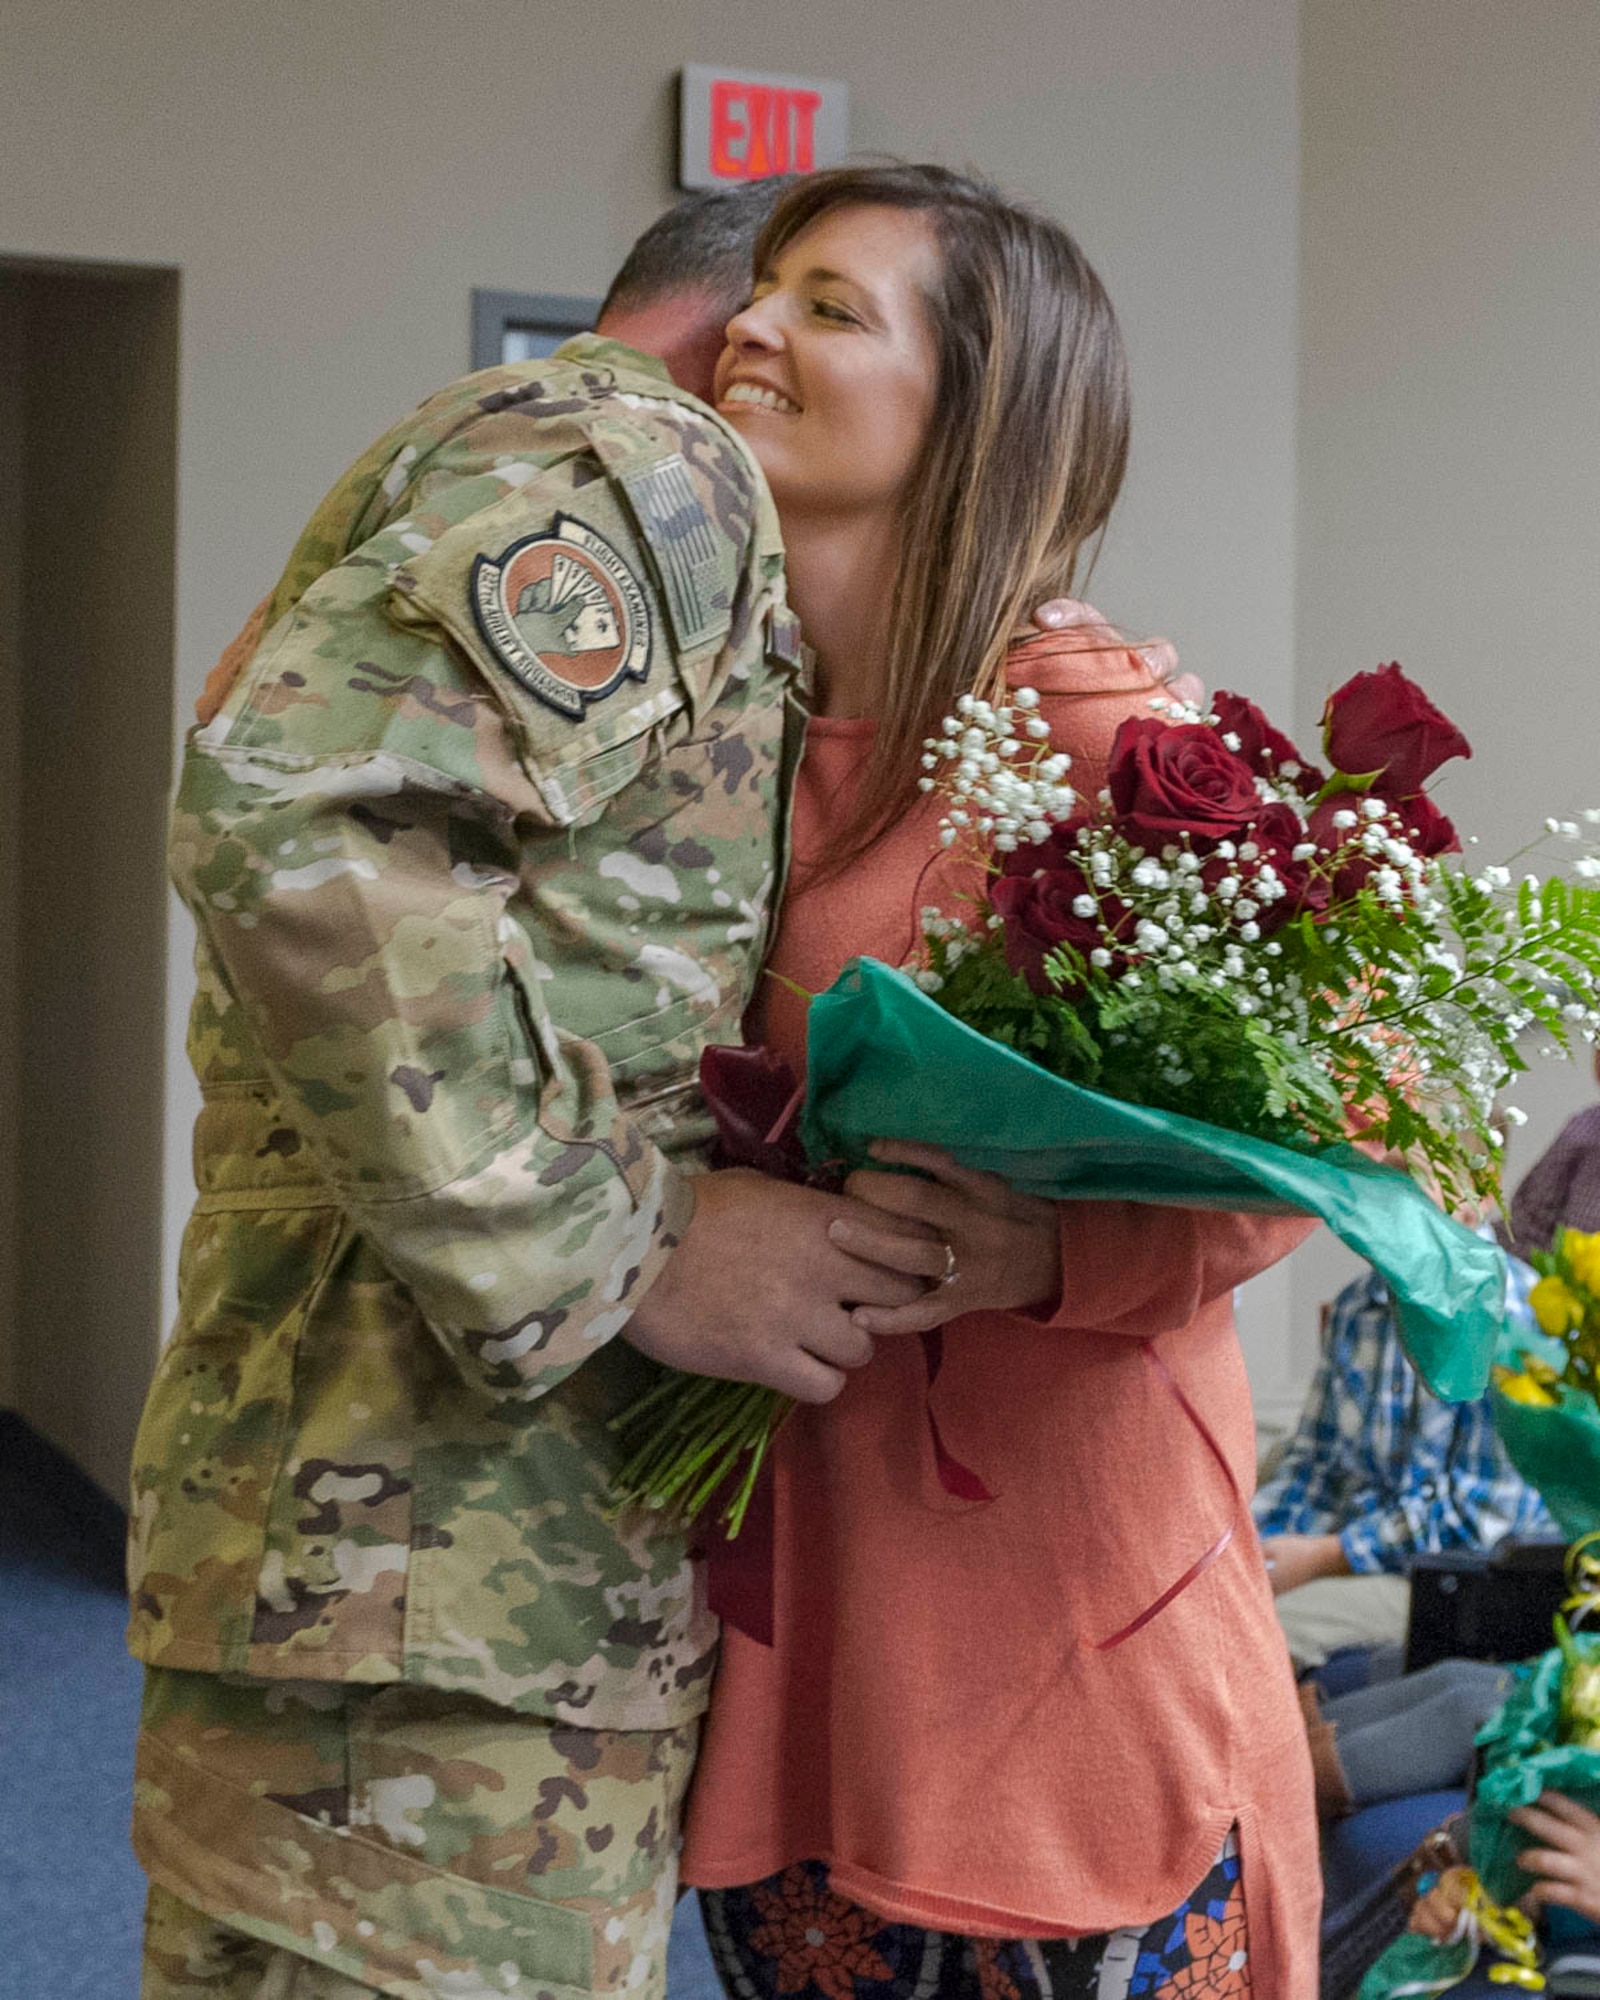 Lt. Col. Jeremy Wagner, 327th Airlift Squadron commander, presents flowers to his spouse during an assumption of command ceremony on Nov. 2, 2019, at Little Rock Air Force Base, Ark. Previous to his current assignment, Lt. Col. Wagner was the chief pilot for the unit. (U.S. Air Force Reserve photo by Maj. Ashley Walker)